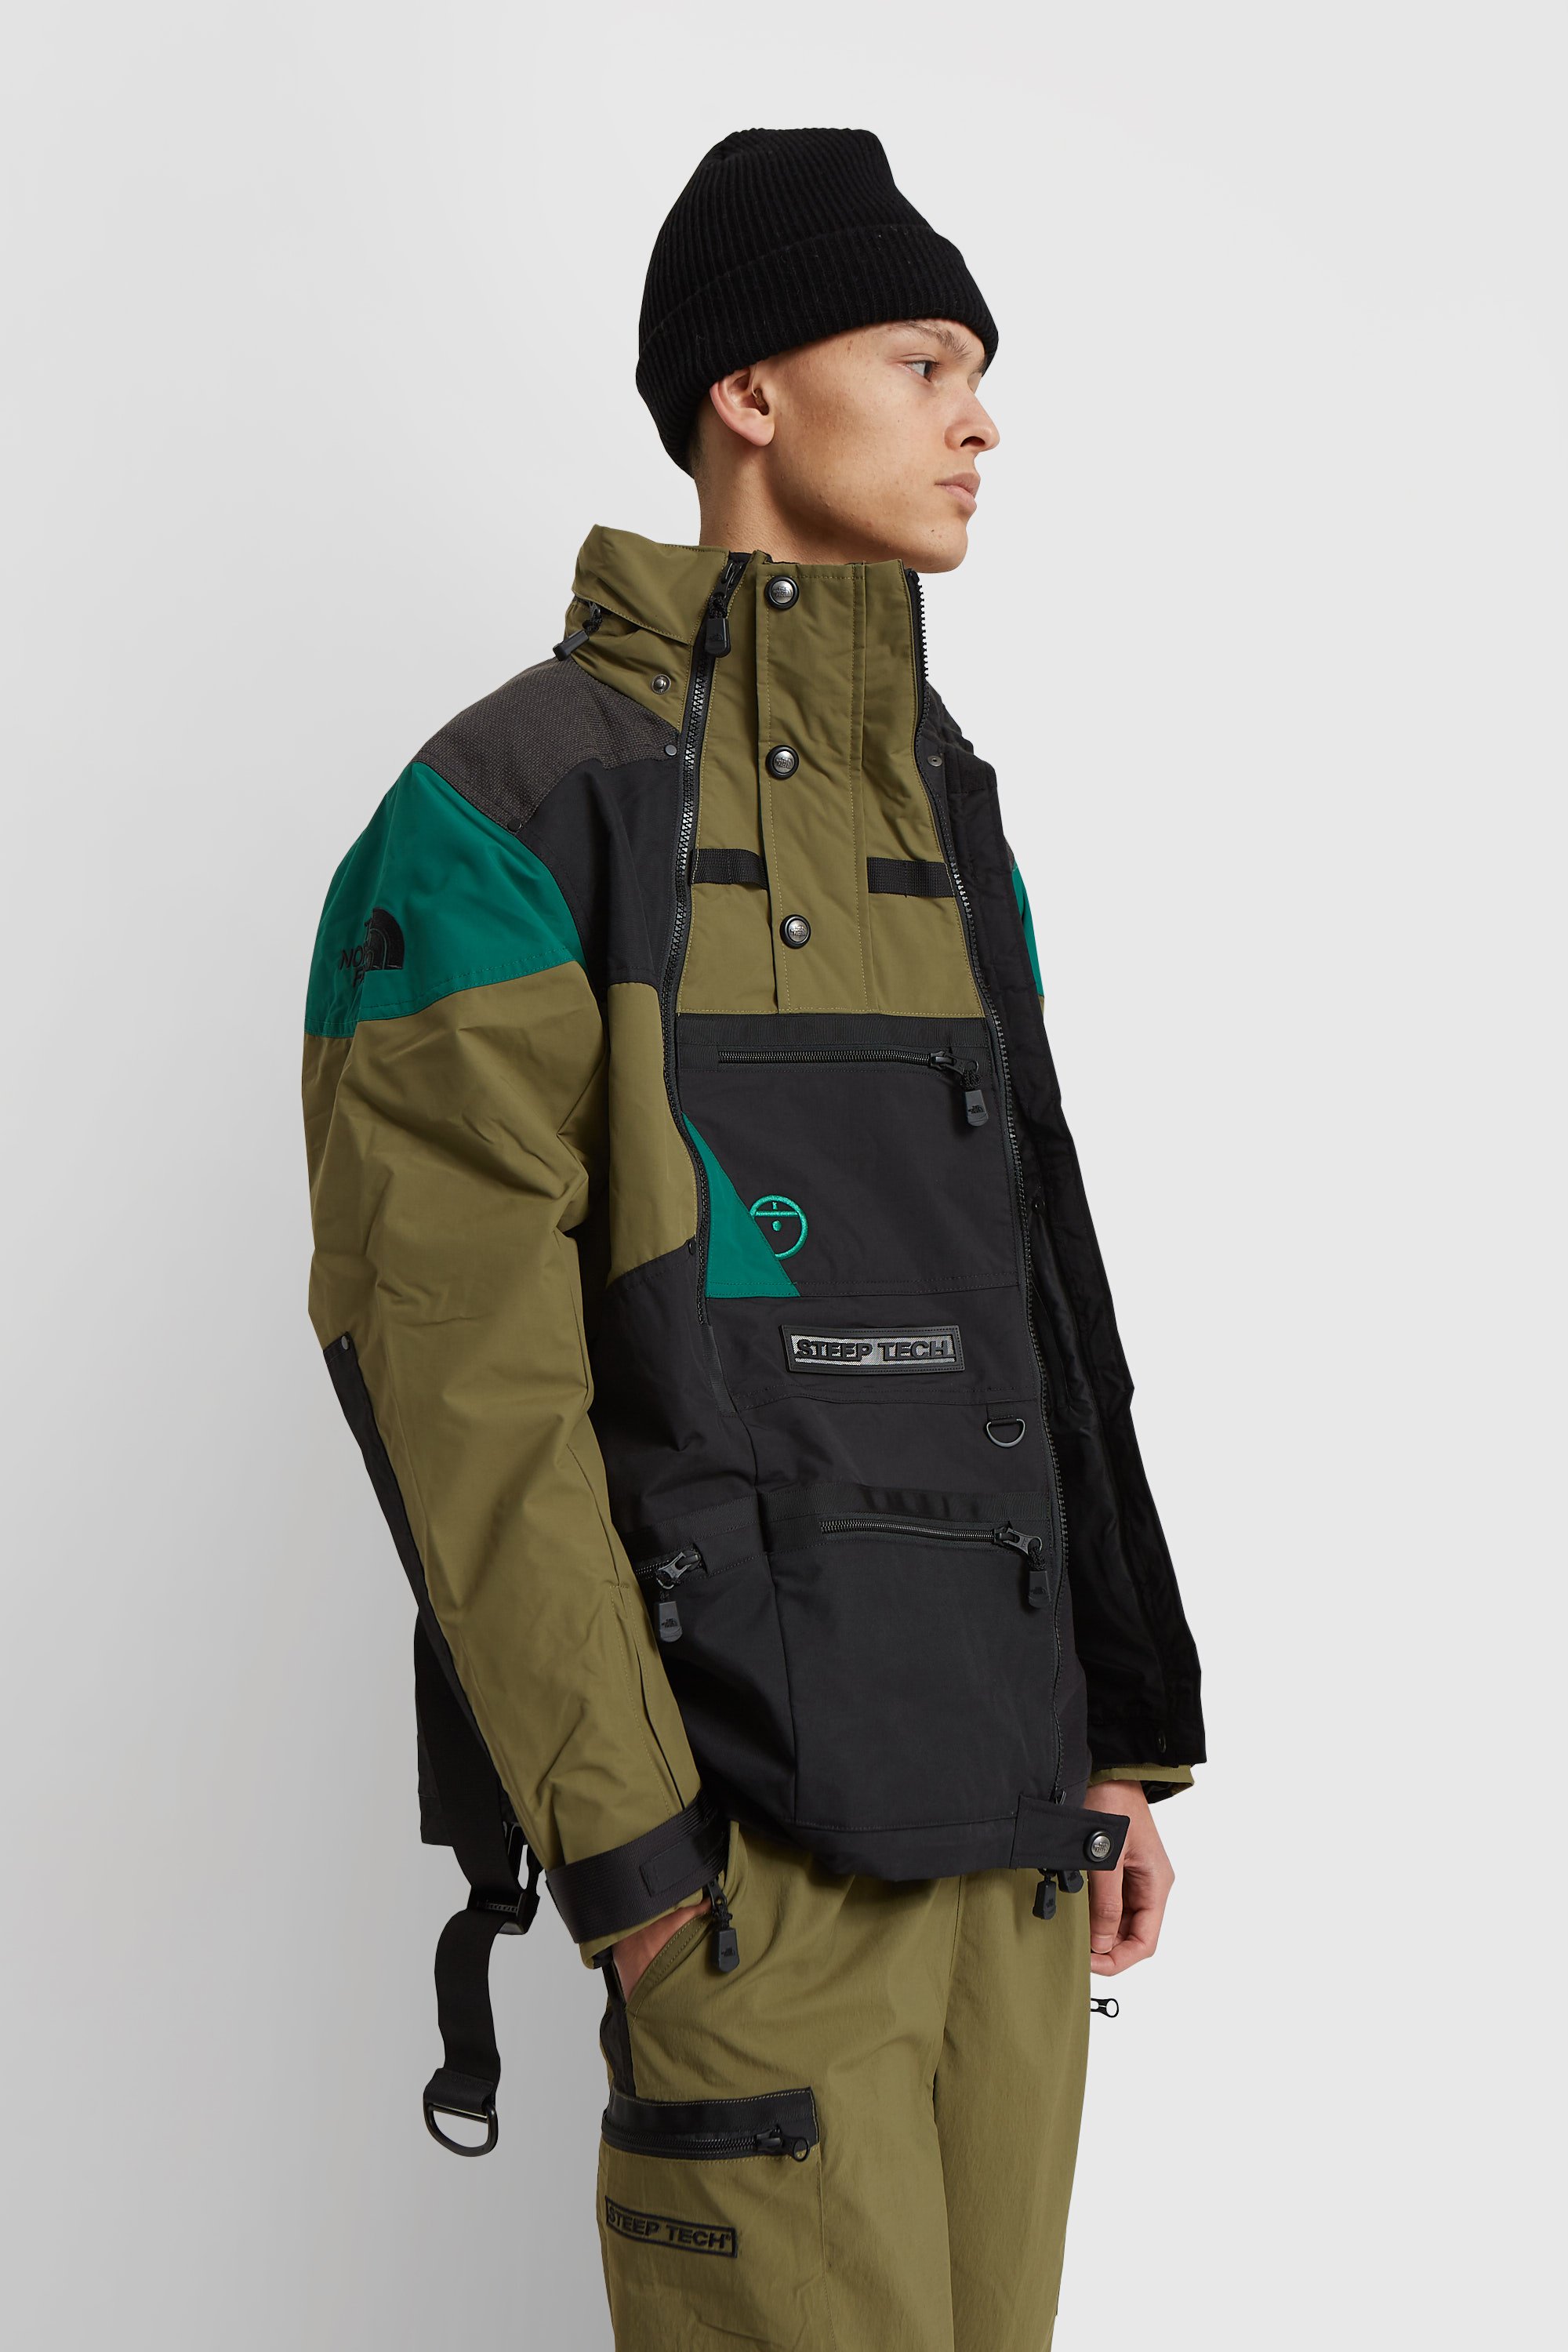 north face steep tech work shell